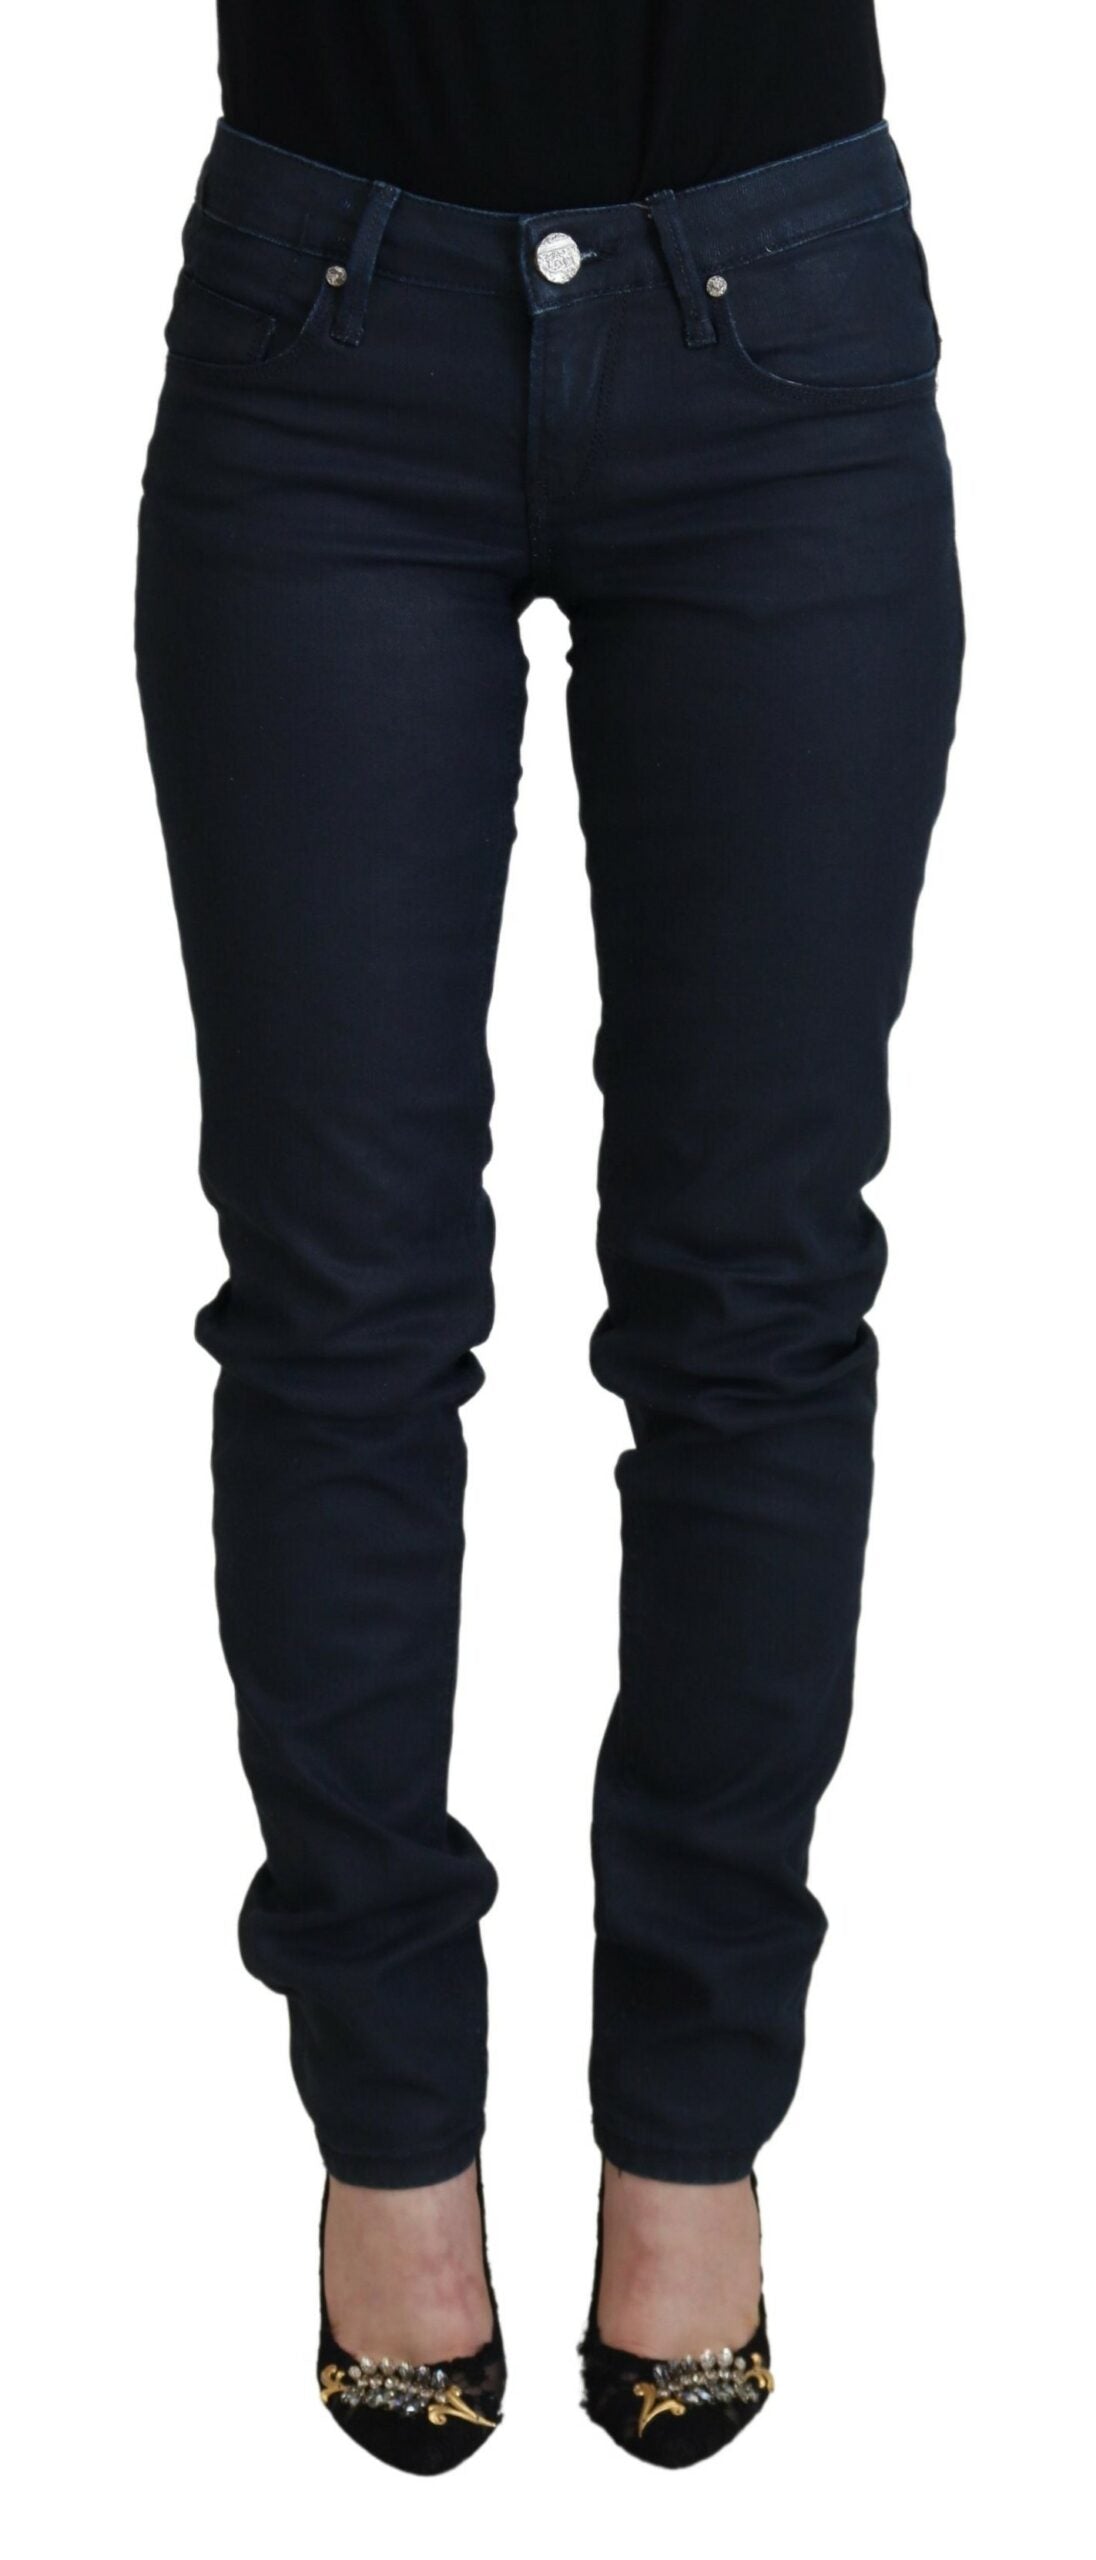 Chic Low Waist Skinny Jeans in Blue